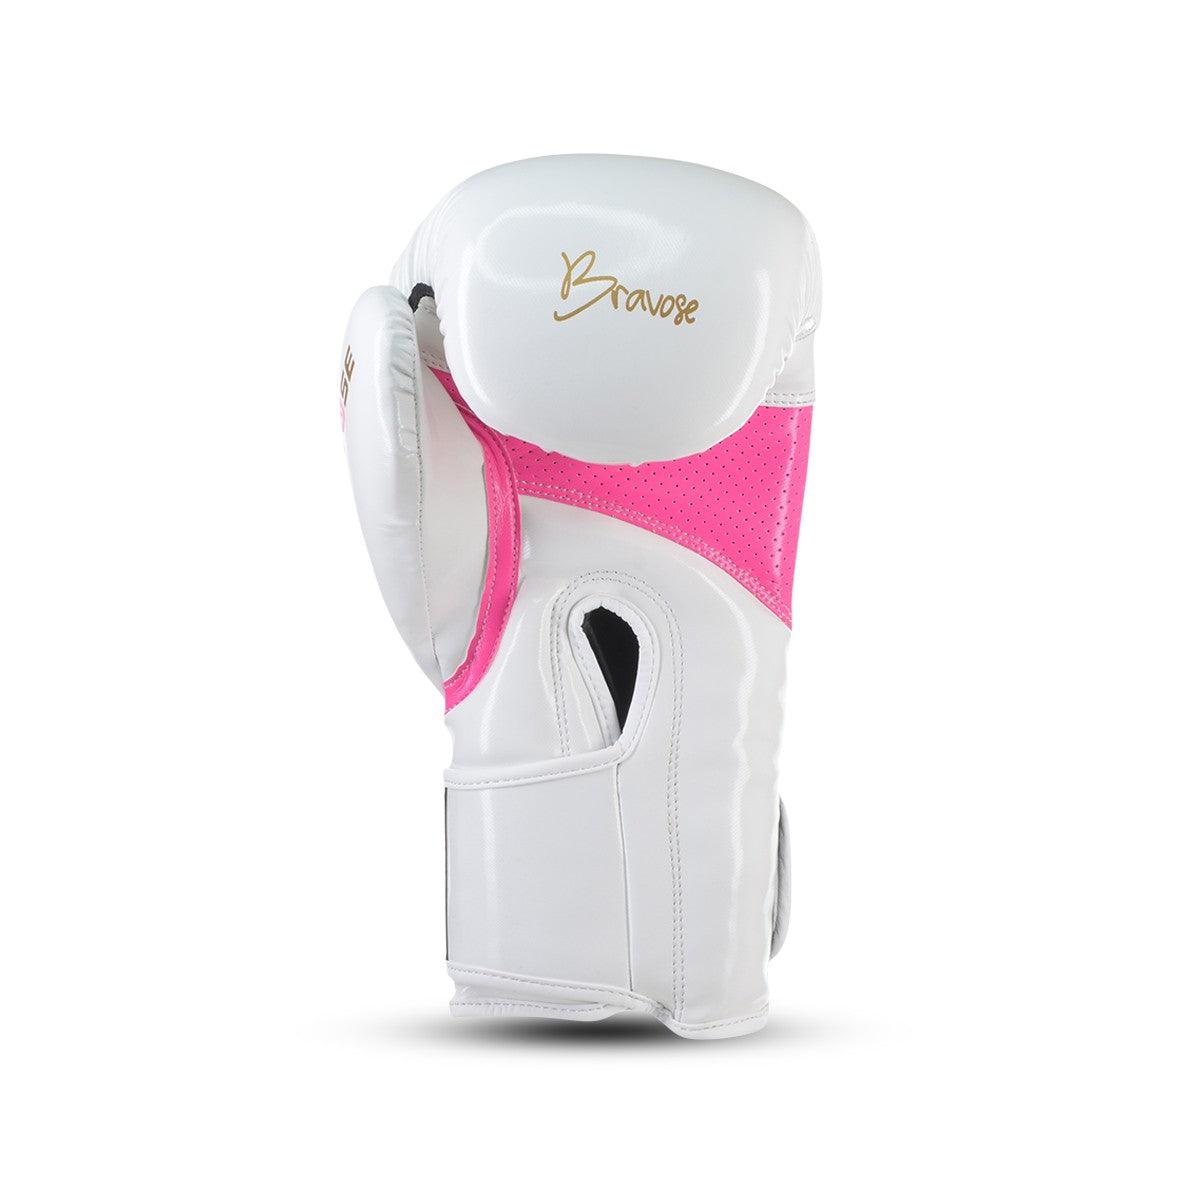 Alpha Pink Premium Quality Boxing Gloves for Bag and Sparring - Bravose